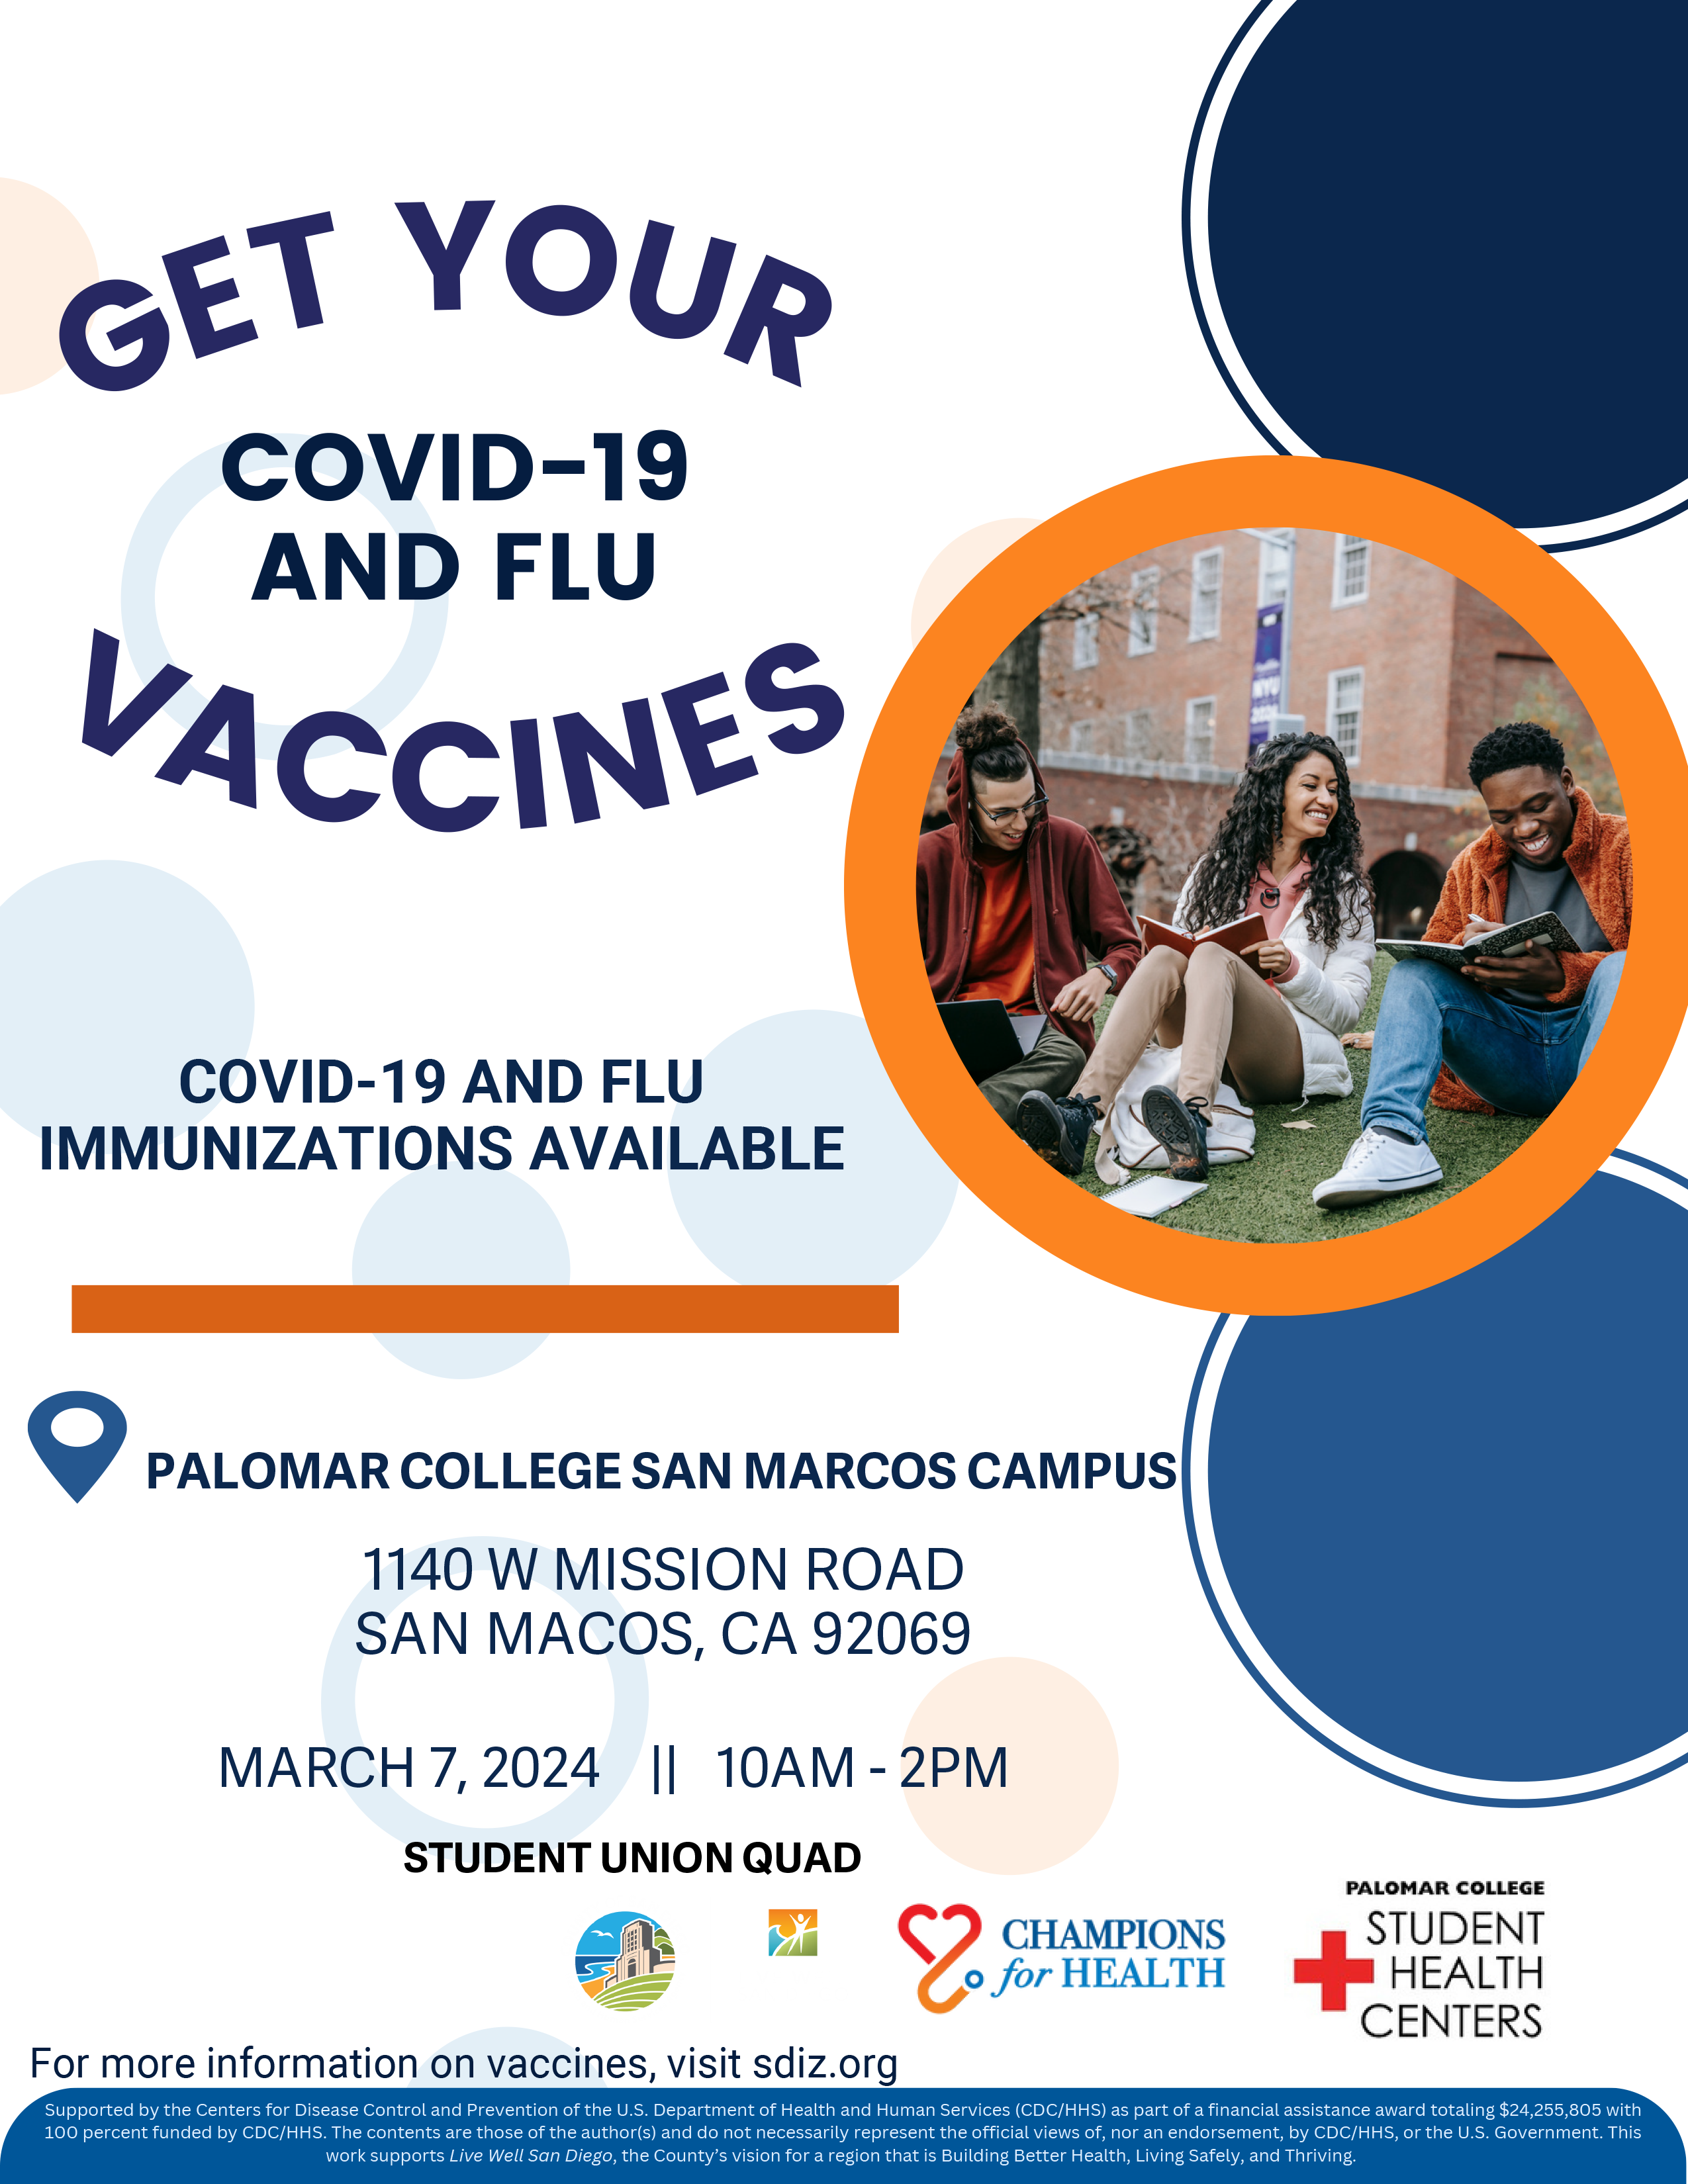 Vaccination Event at San Marcos campus 3/7/24